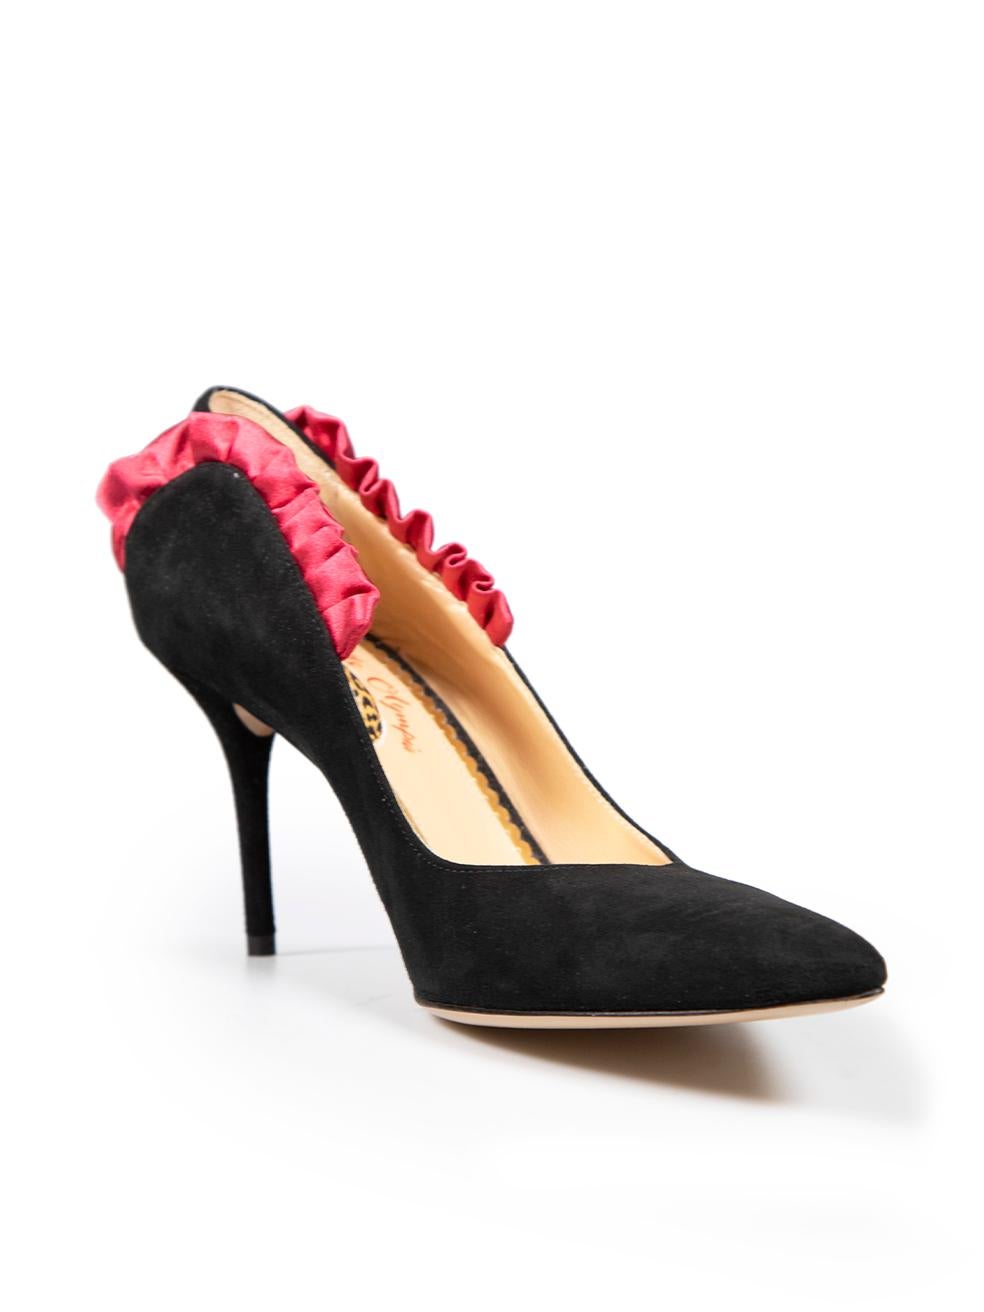 CONDITION is Very good. Hardly any visible wear to shoes is evident on this used Charlotte Olympia designer resale item.
 
 
 
 Details
 
 
 Black
 
 Suede
 
 Pumps
 
 Point toe
 
 Pink satin ruffle trim
 
 Slip on
 
 High heeled
 
 
 
 
 
 Made in